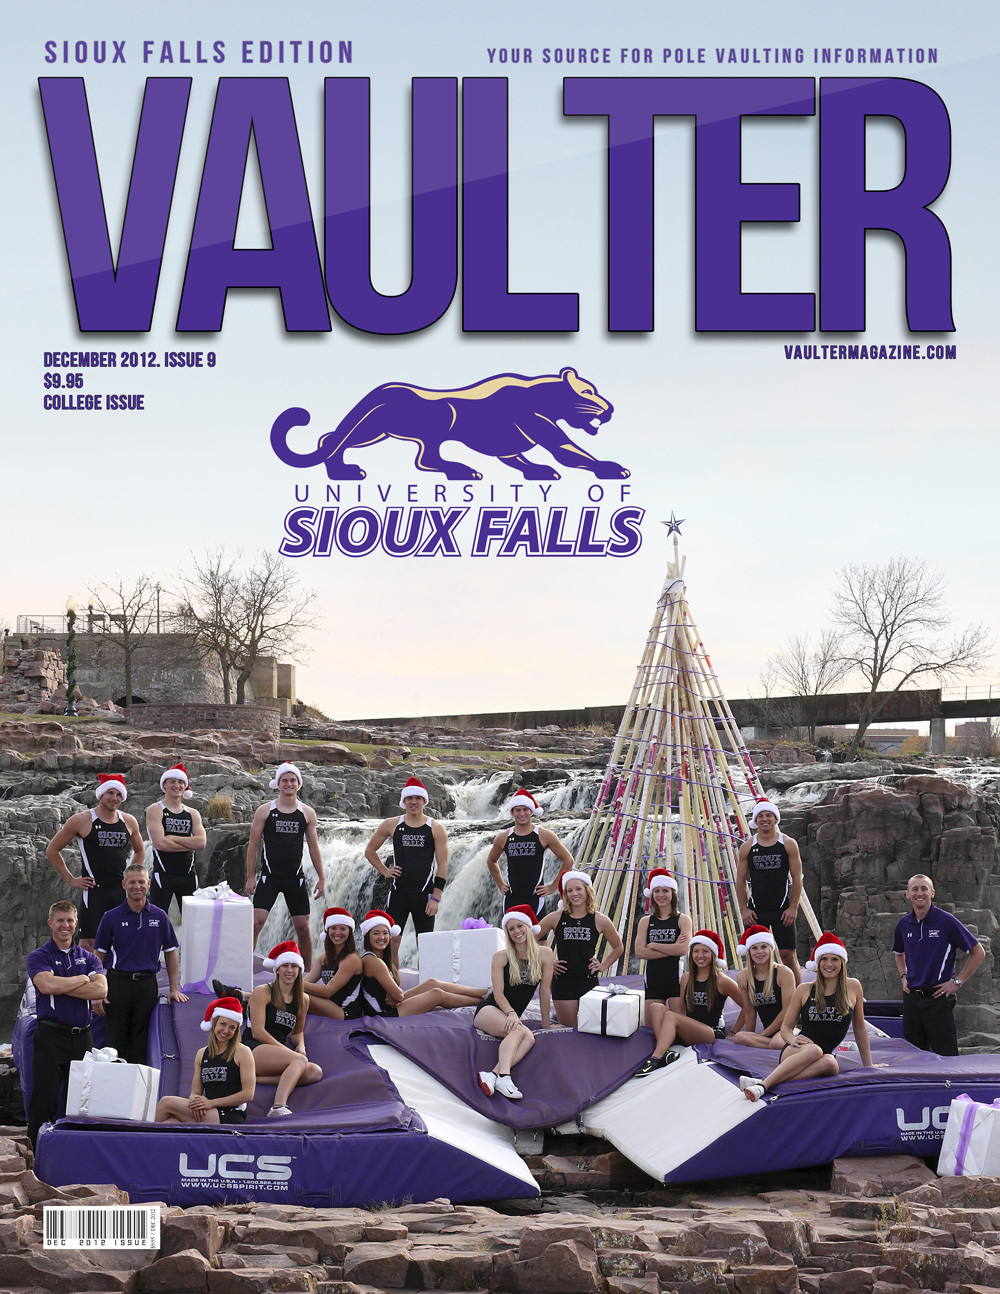 Poster of Sioux Falls University Cover of VAULTER